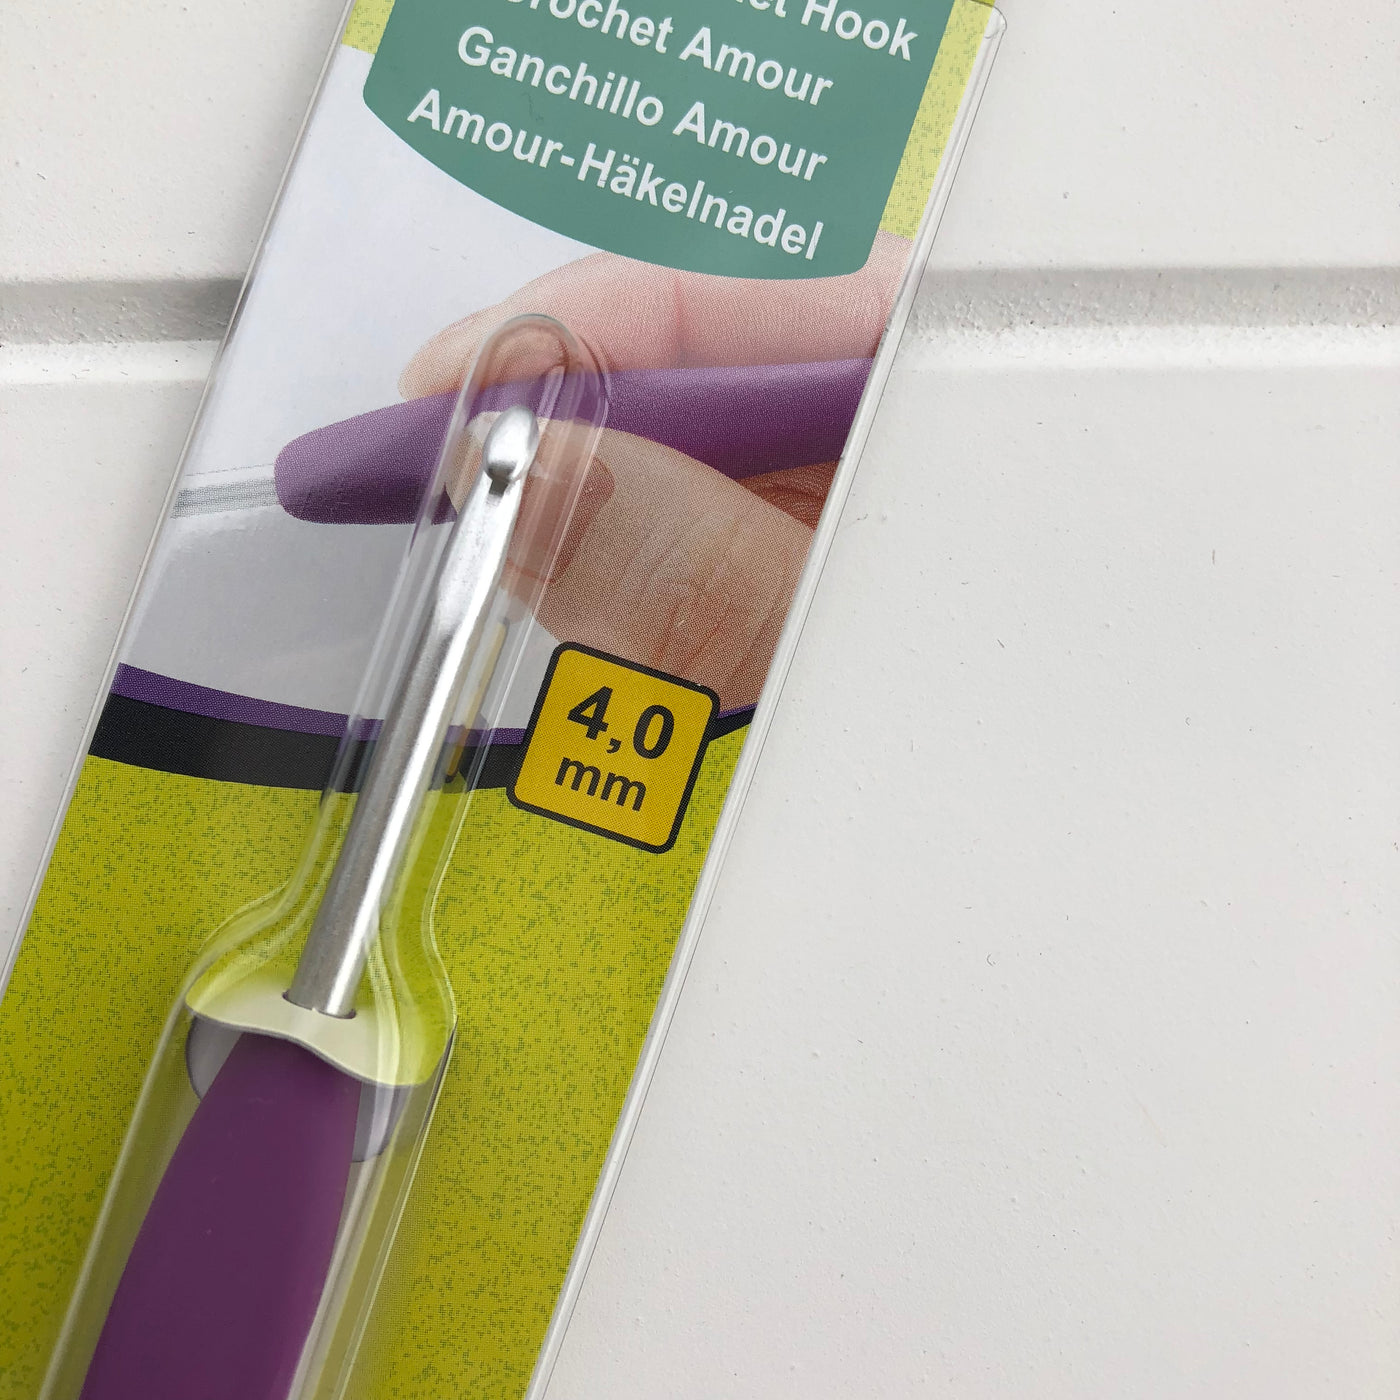 Where can I find Clover Amour Crochet Hooks 4mm